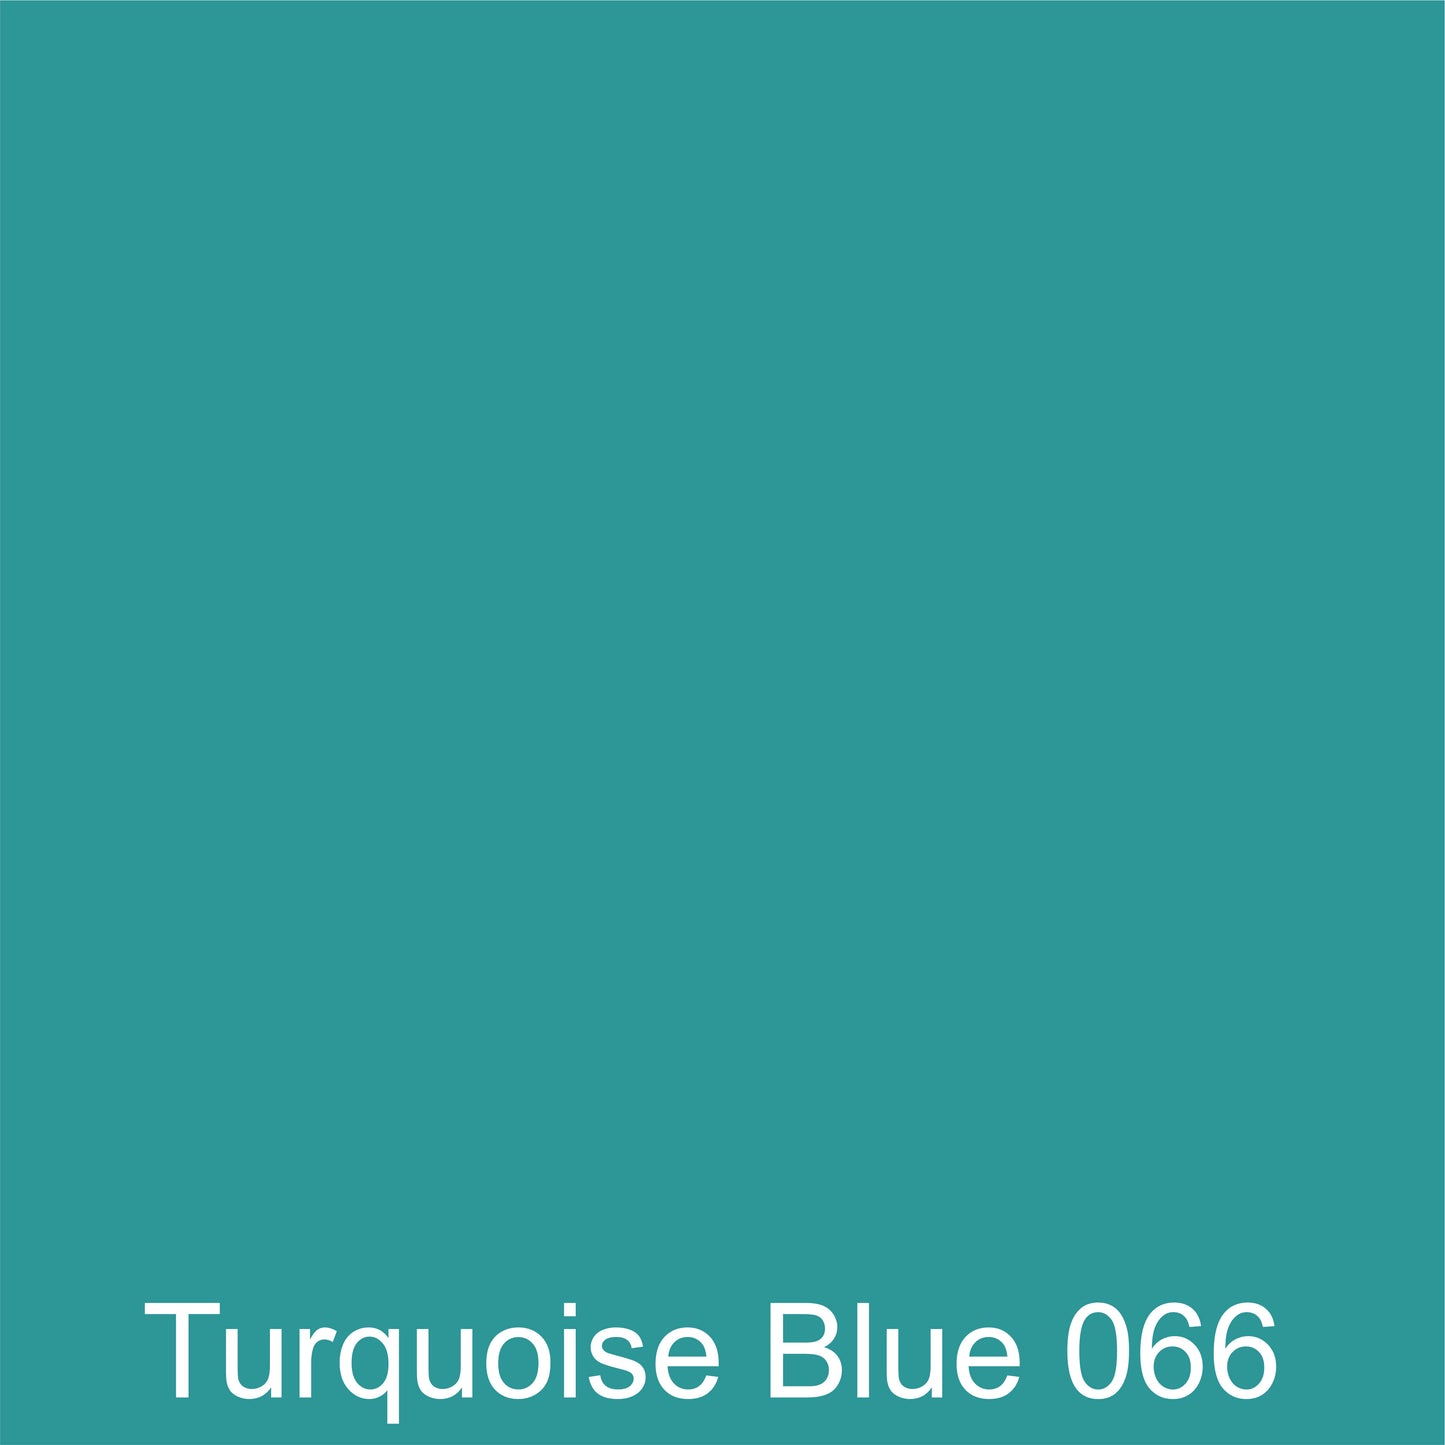 Oracal 651 Gloss :- Turquoise Blue - 066